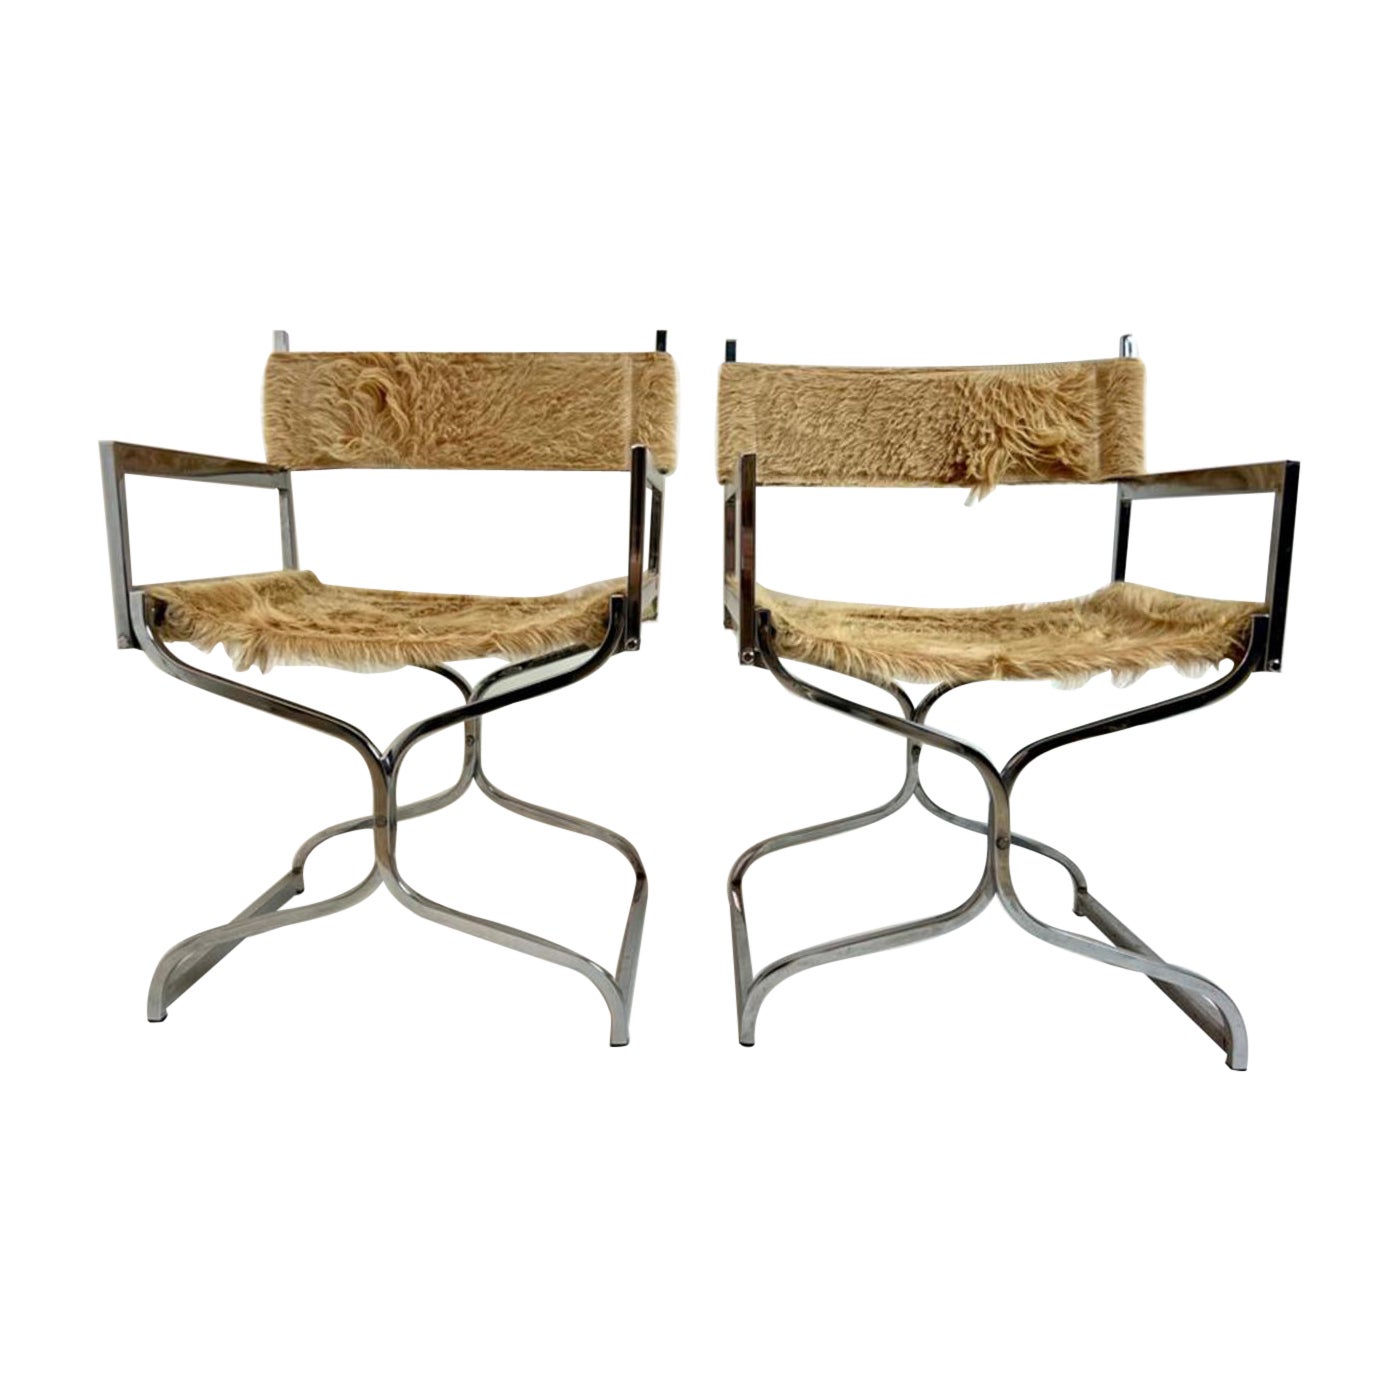 Set of Two Chrome Chairs With Horse Skin Upholstery by Arrmet, Italy